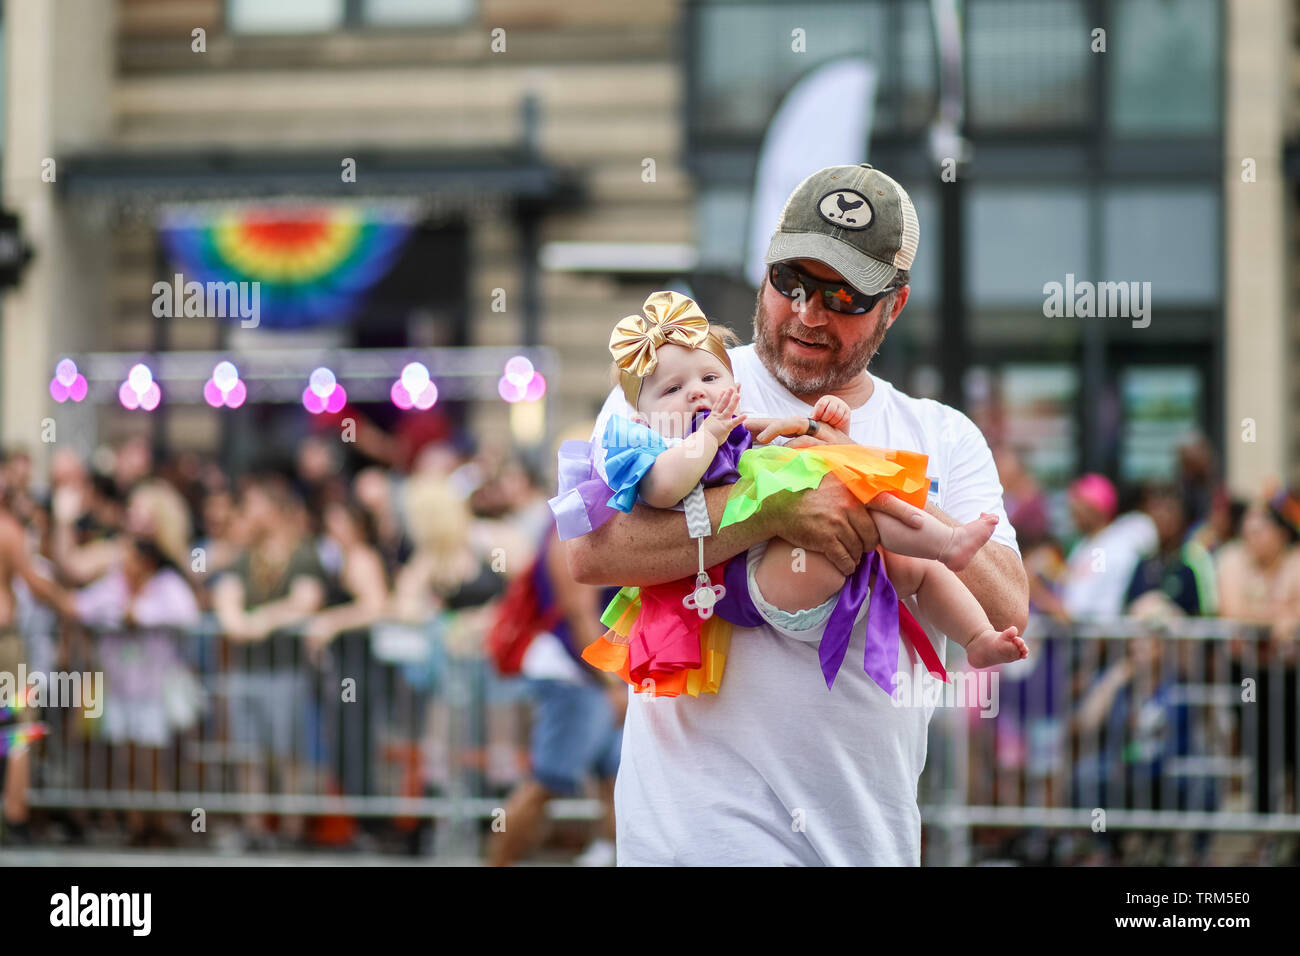 Washington, DC, USA. 8th June 2019. The Capital Pride Parade takes place every year on a Saturday in June between Dupont Circle and Logan Circle. Stock Photo